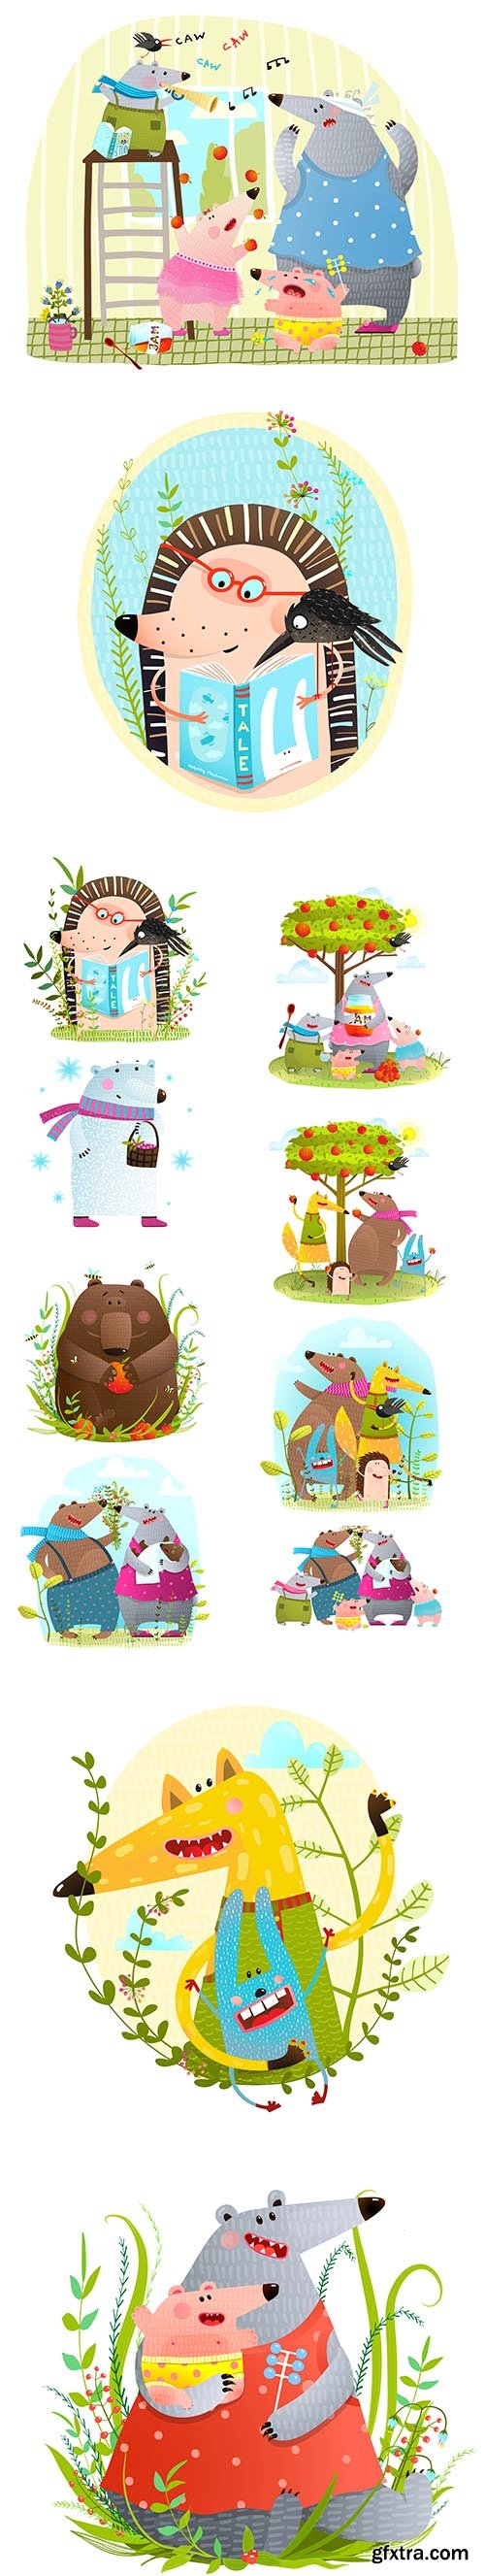 Bear Family and other animals forest